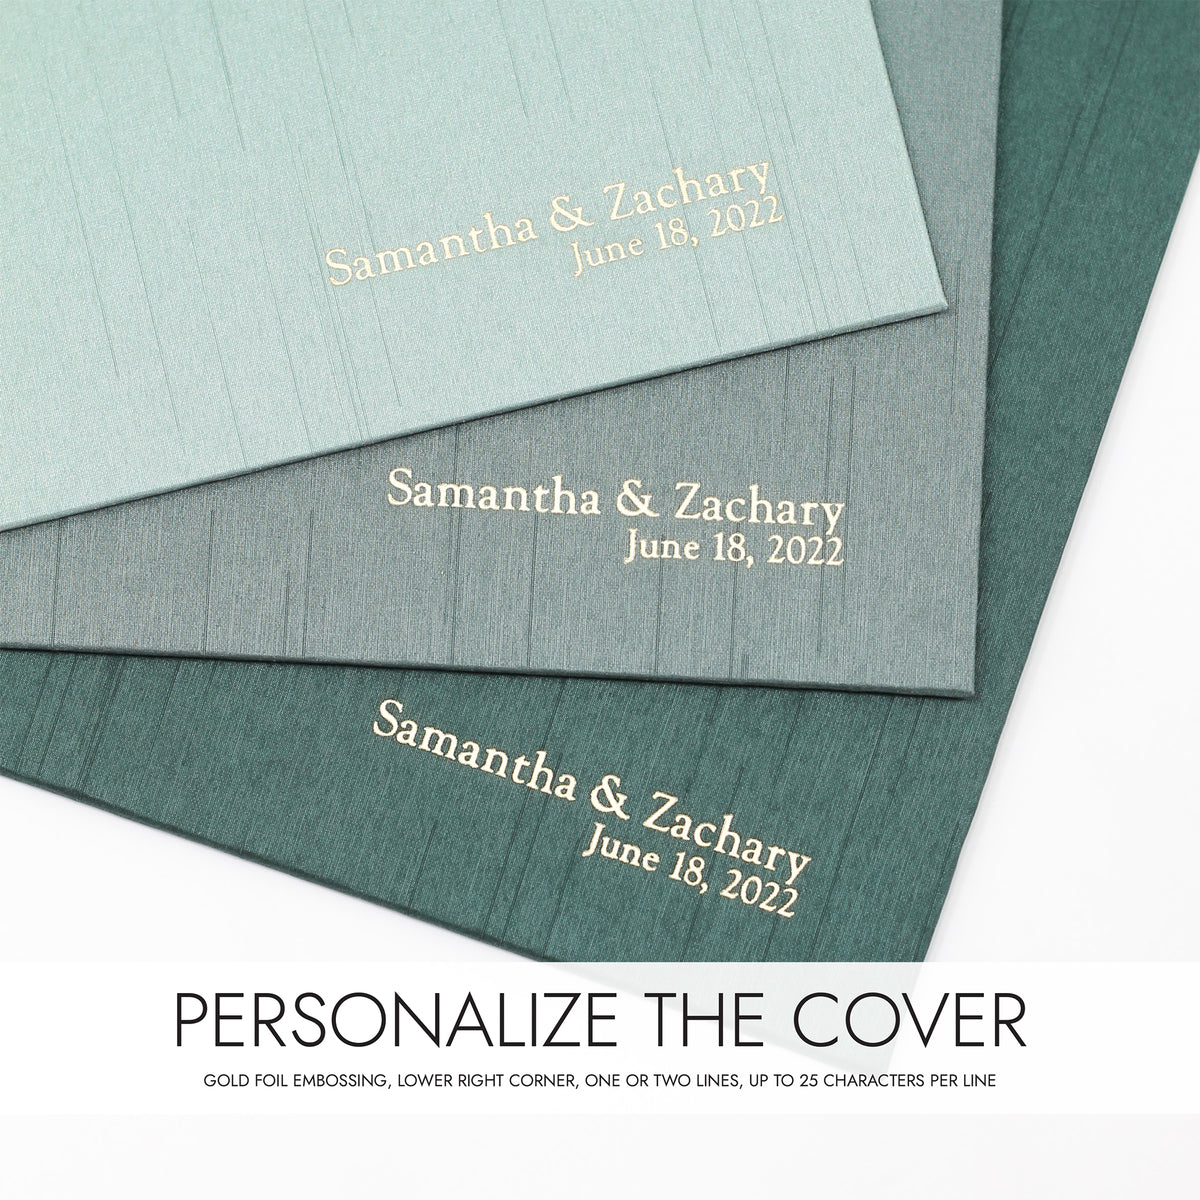 Guestbook with Misty Blue Silk Cover